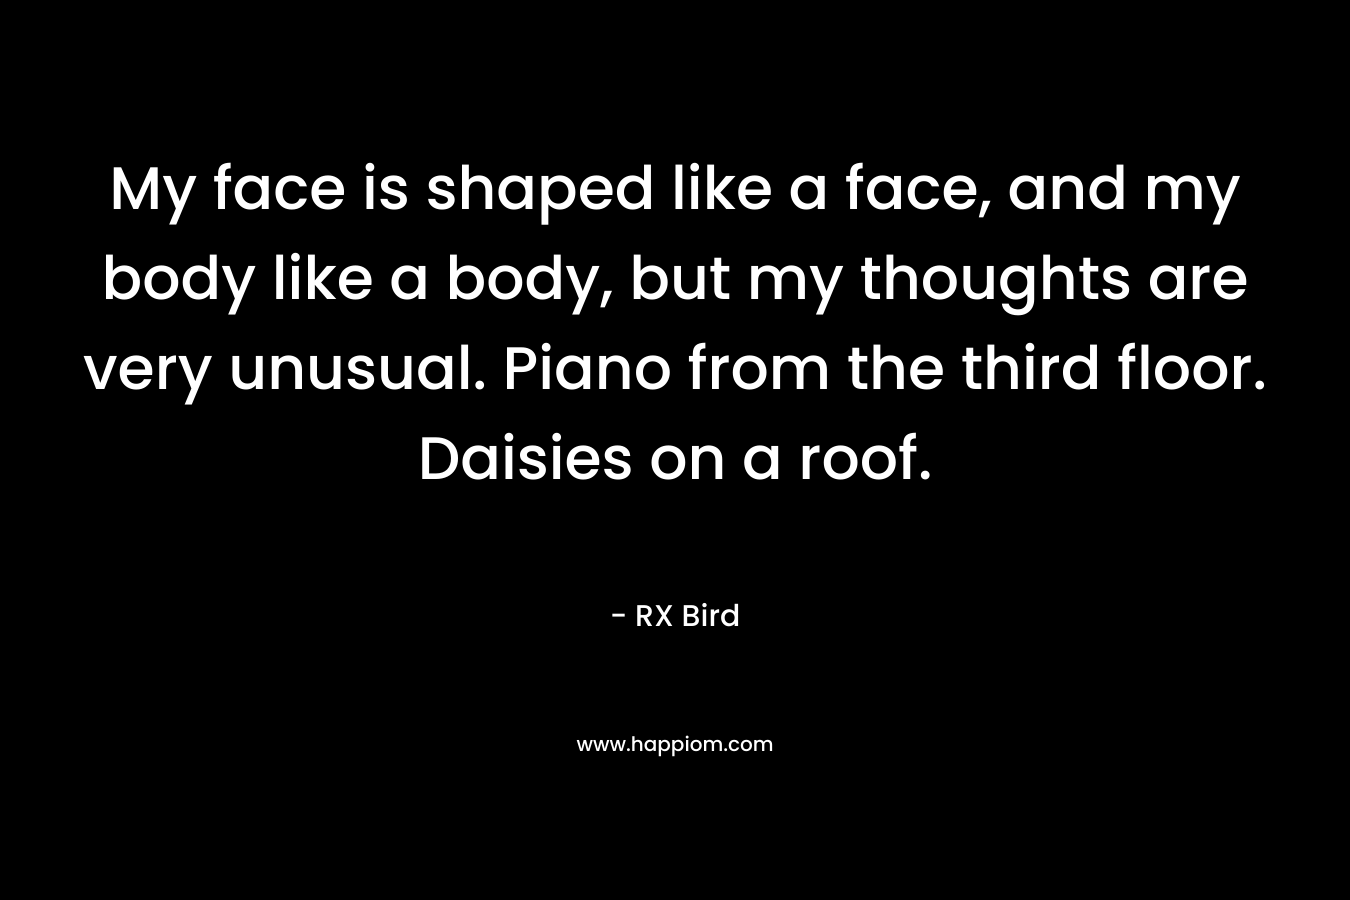 My face is shaped like a face, and my body like a body, but my thoughts are very unusual. Piano from the third floor. Daisies on a roof.